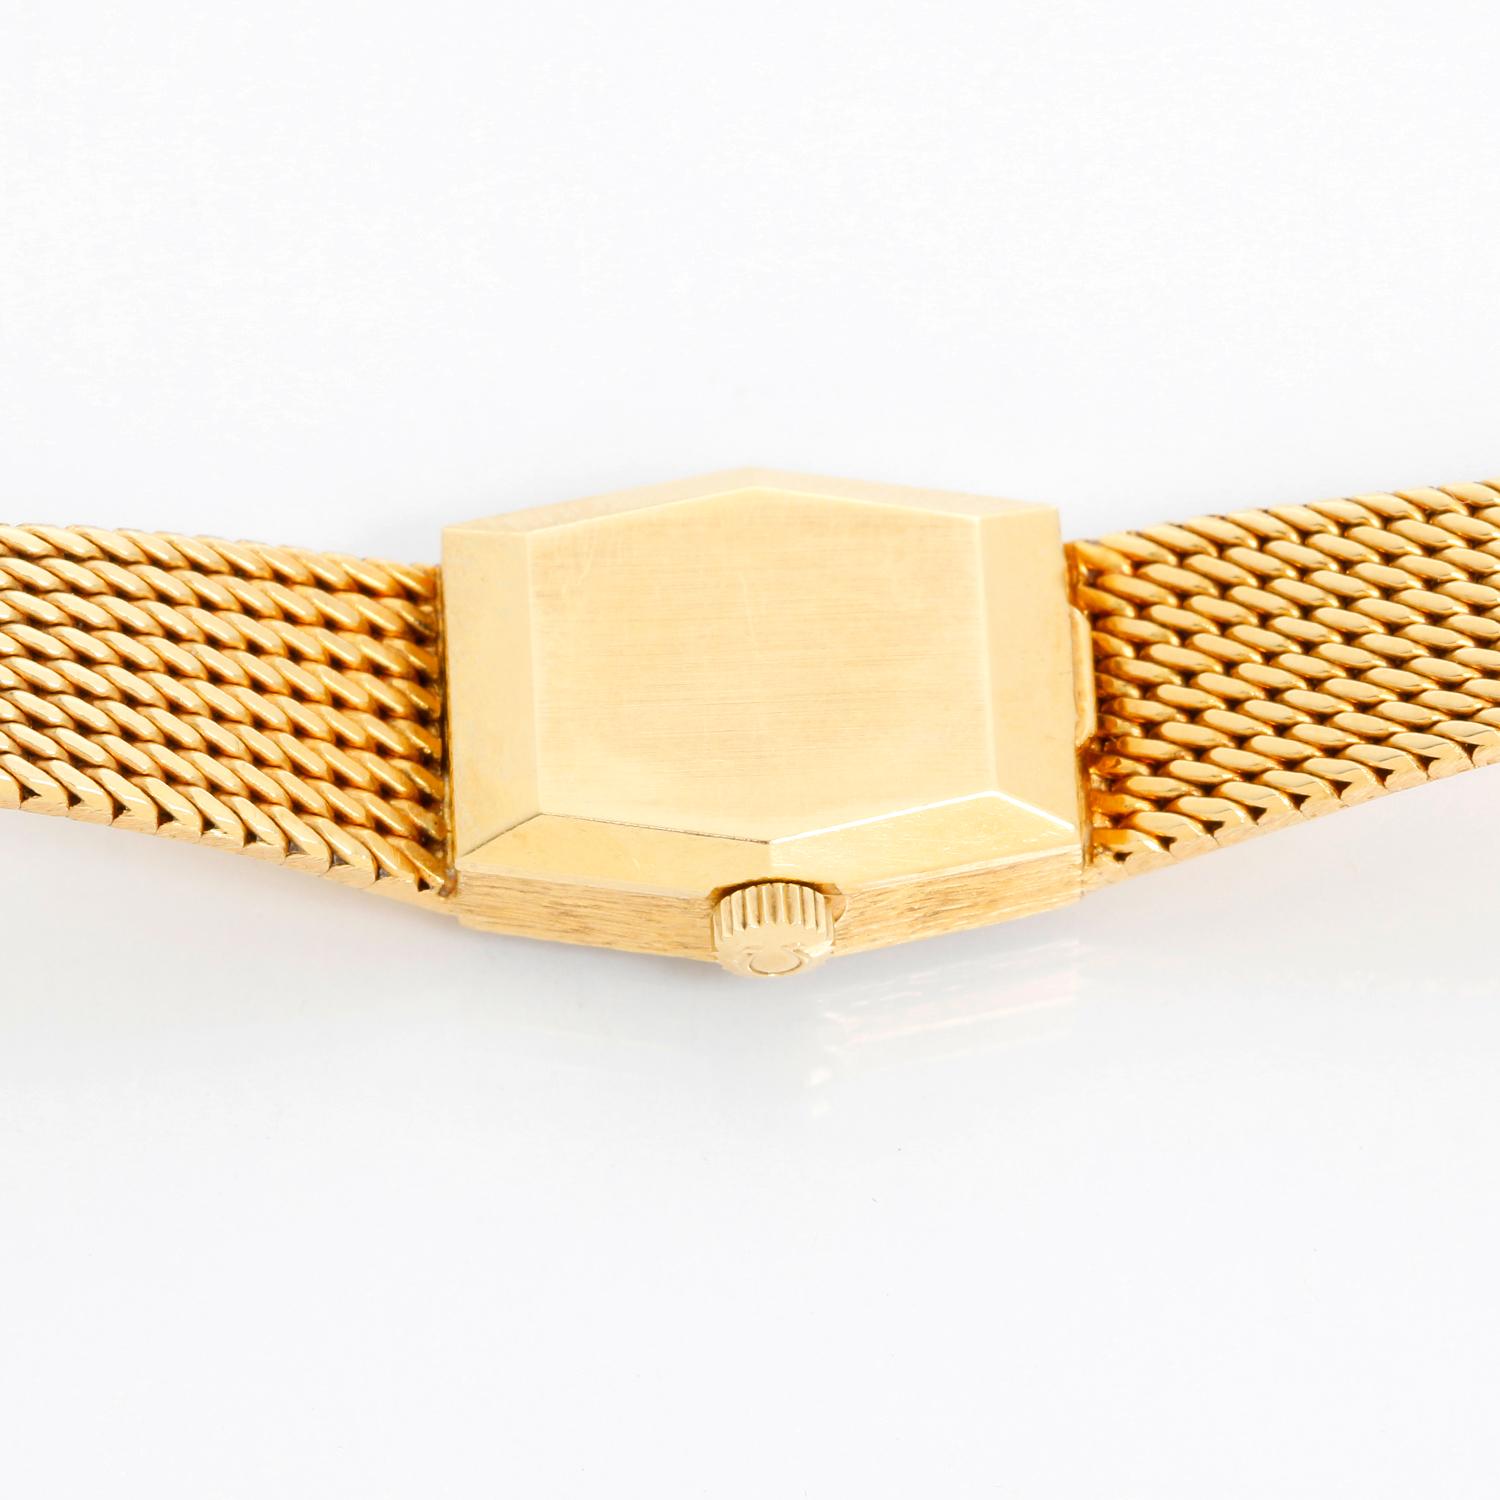 Omega 18K Yellow Gold Classic Watch  Ref 8261 - Manual winding . 18K Yellow gold ( 21 x 16 mm) . Champagne textured dial with stick hour markers . 18K Yellow gold mesh bracelet; will fit a 6 inch wrist or smaller . Pre-owned with custom box .